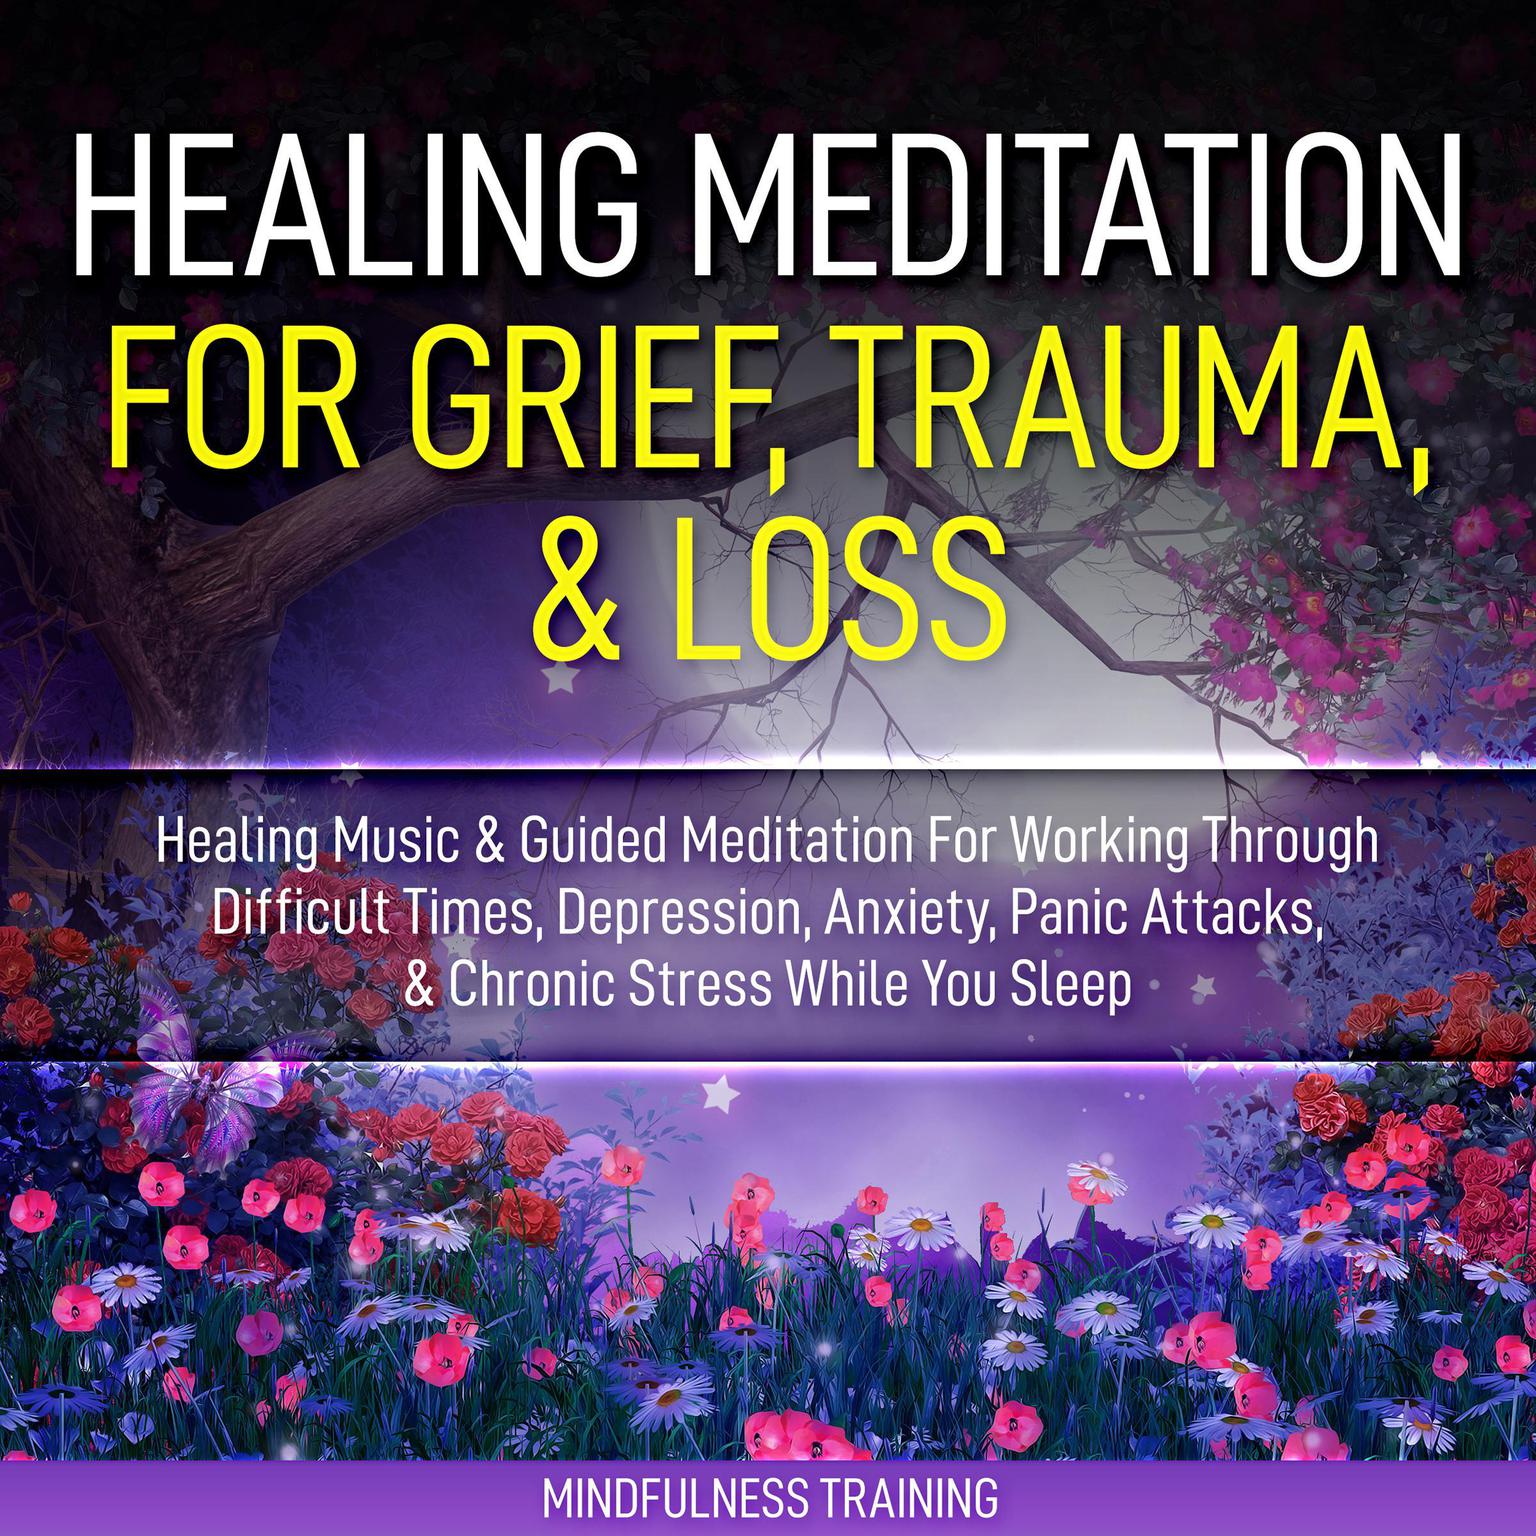 Healing Meditation for Grief, Trauma, & Loss: Healing Music & Guided Meditation For Working Through Difficult Times, Depression, Anxiety, Panic Attacks, & Chronic Stress While You Sleep (Self Hypnosis for Anxiety Relief, Stress Reduction, & Relaxation) Audiobook, by Mindfulness Training